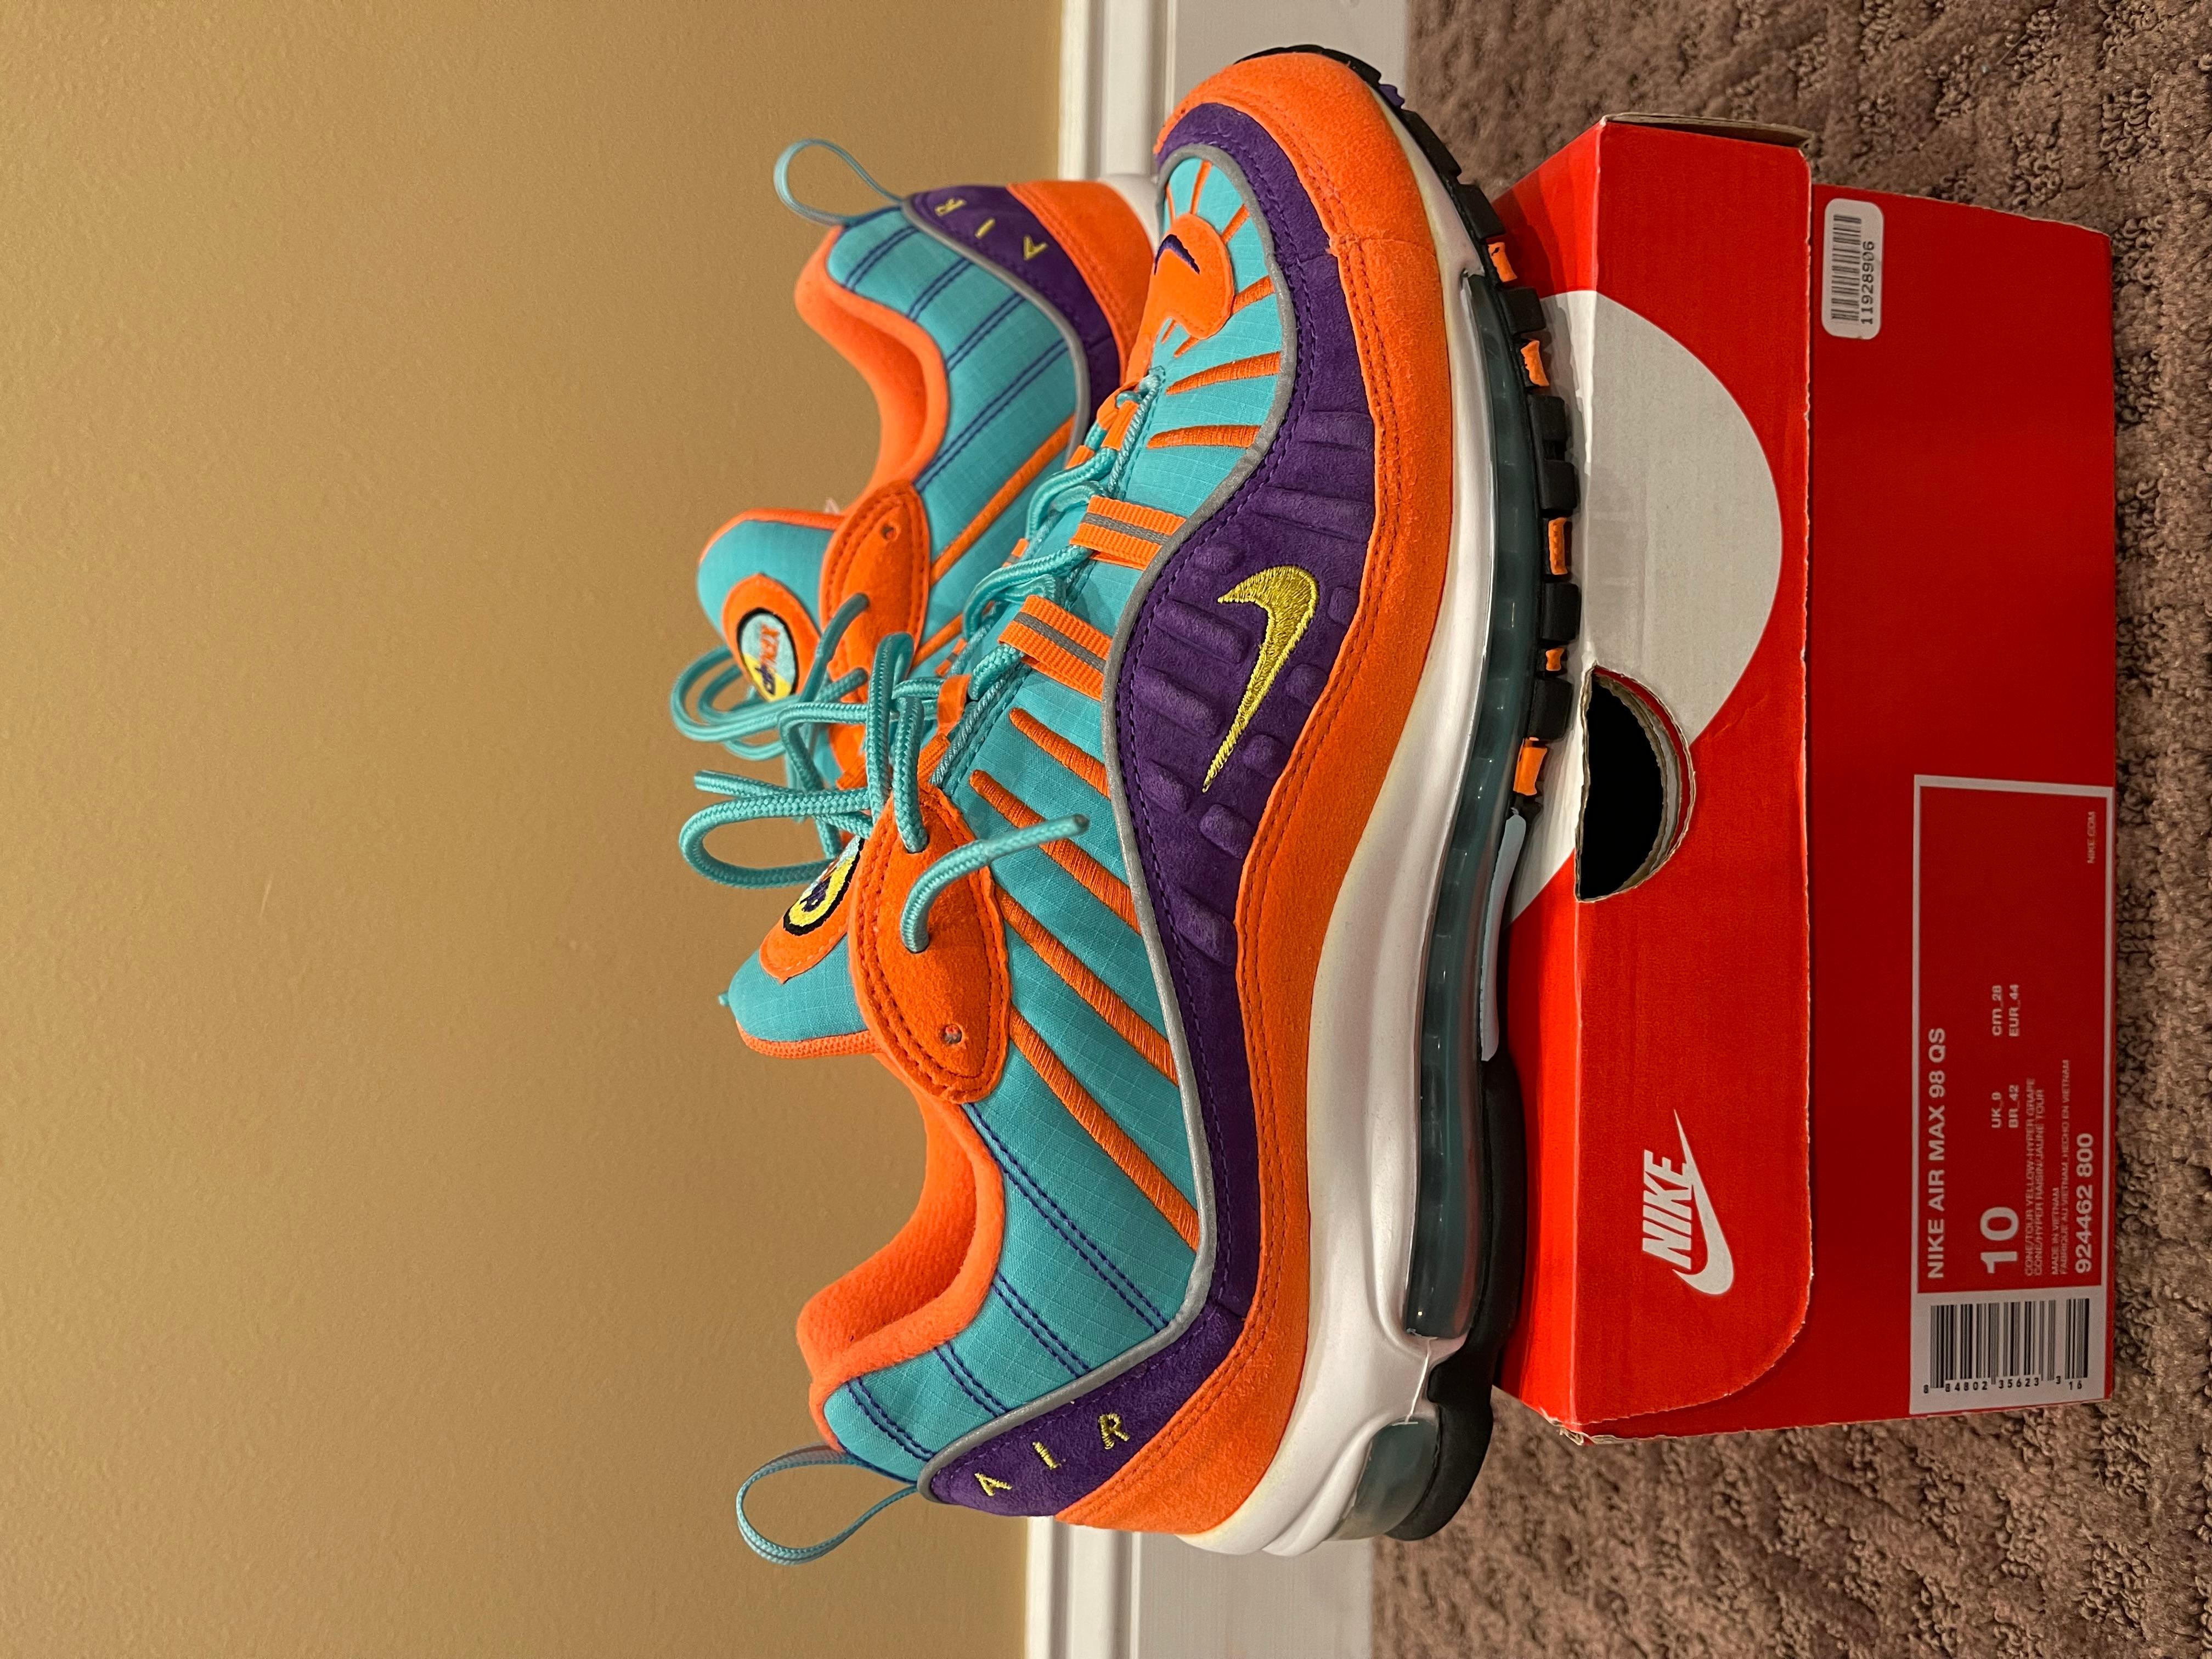 Nike Air Max 98 “Cone”
Size 10
Og all
Excellent condition